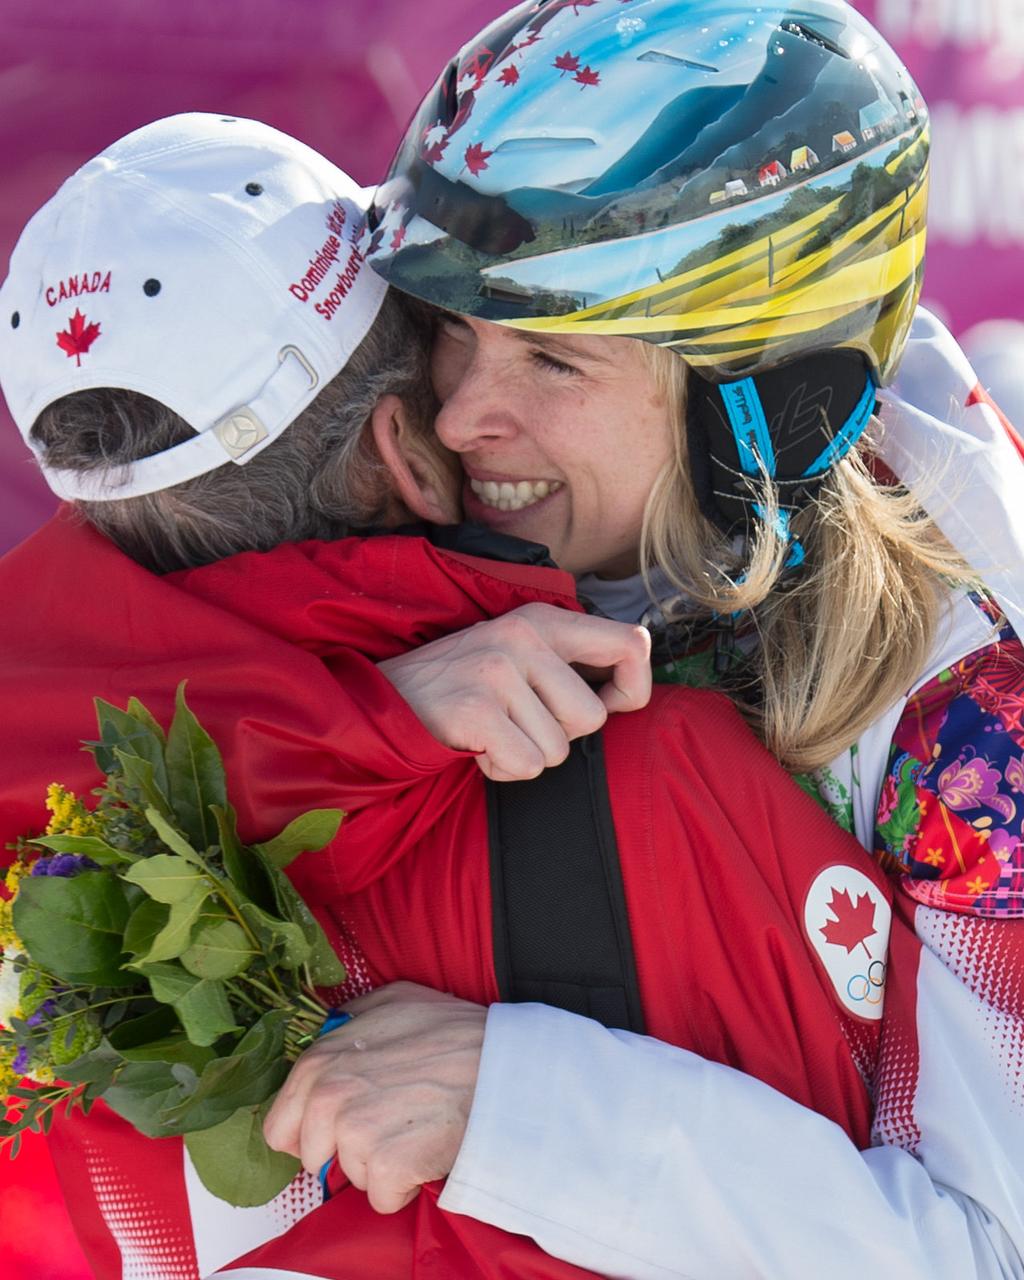 She moved nto second place and crossed the fnsh lne wth a slver medal. She was elated. She grabbed a Canadan flag and celebrated wth her frends and her dad.